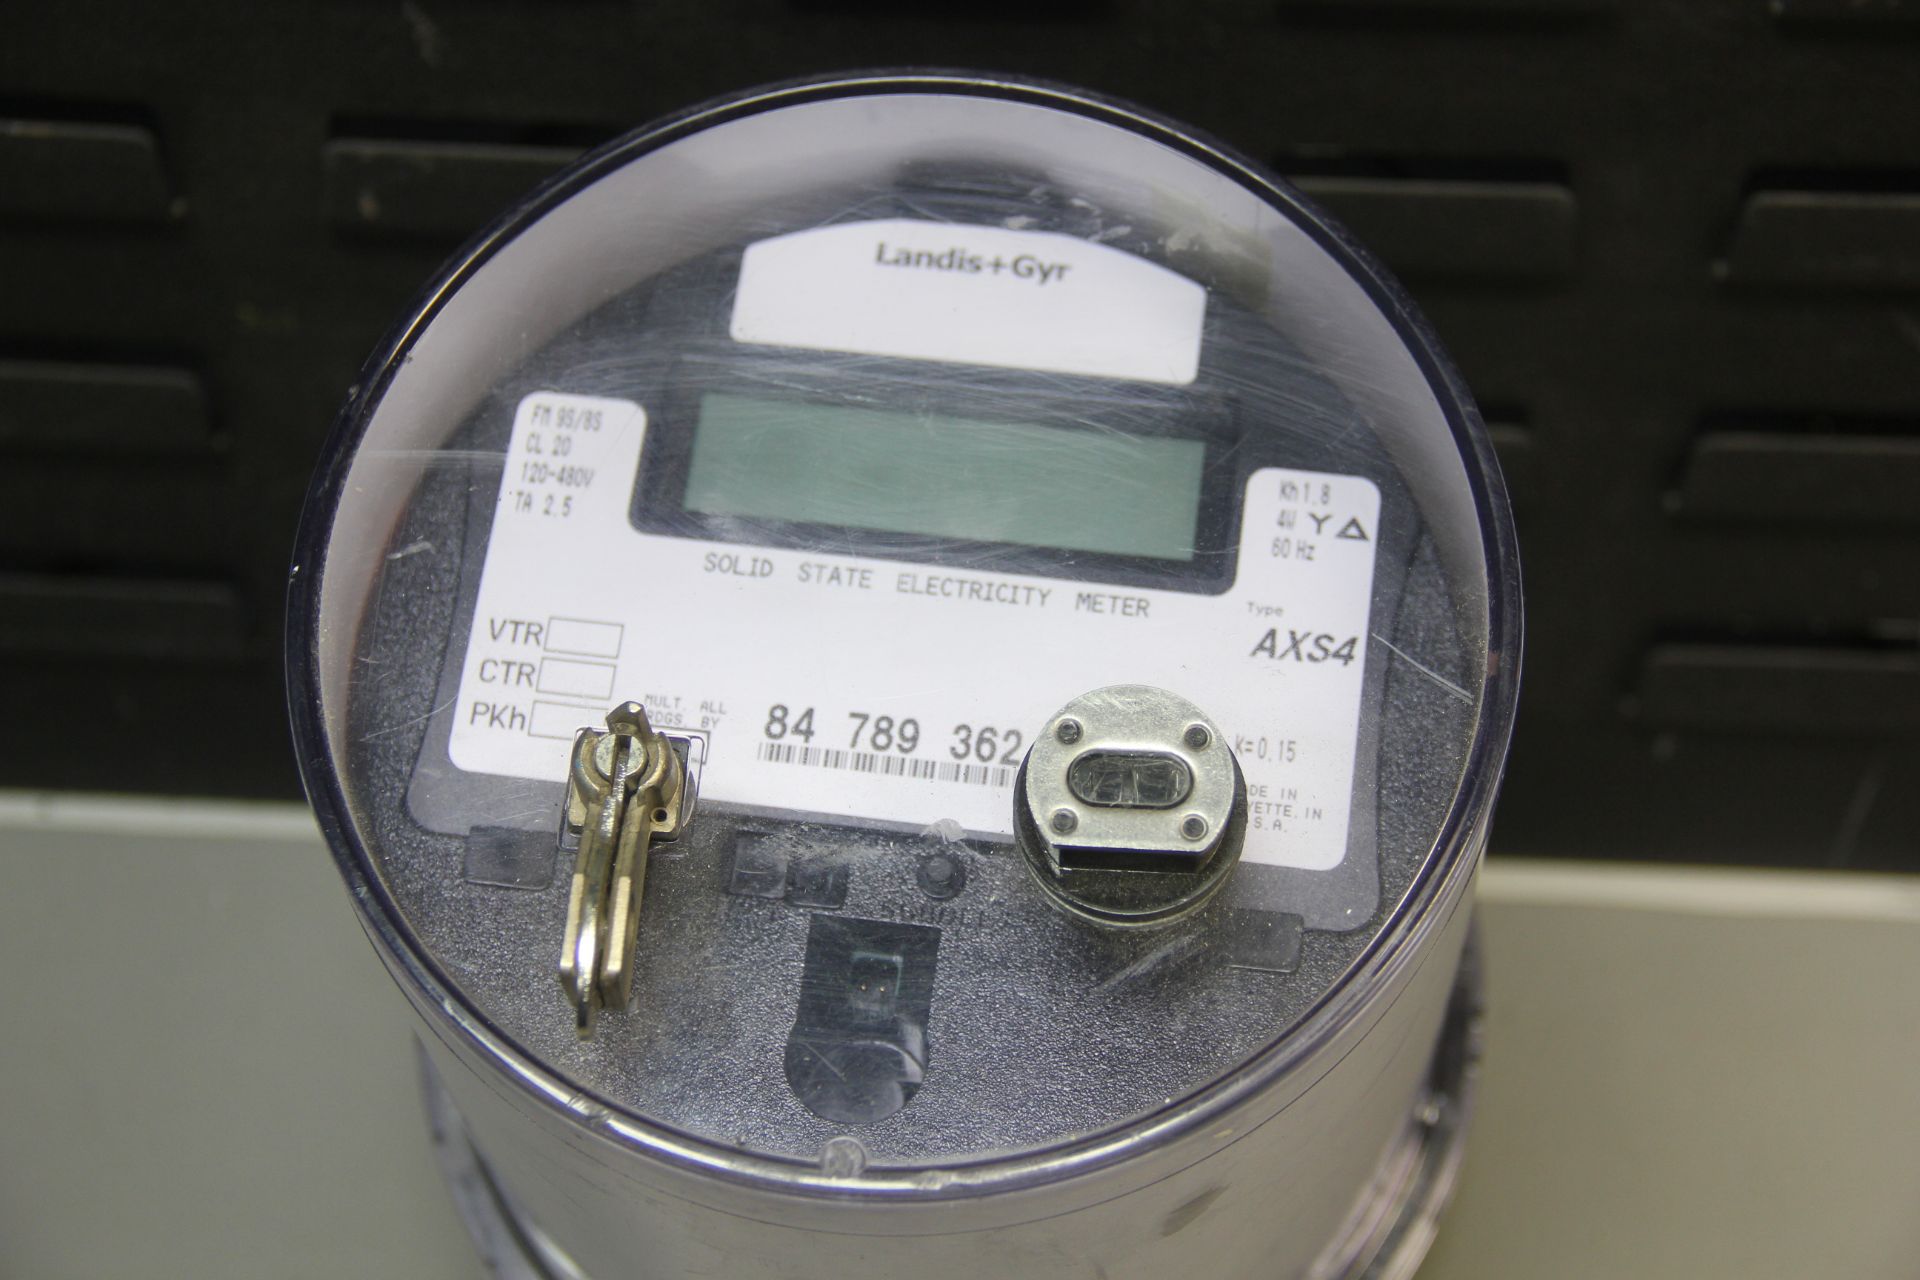 LANDIS+GYR SOLID STATE ELECTRICITY METER - Image 2 of 4